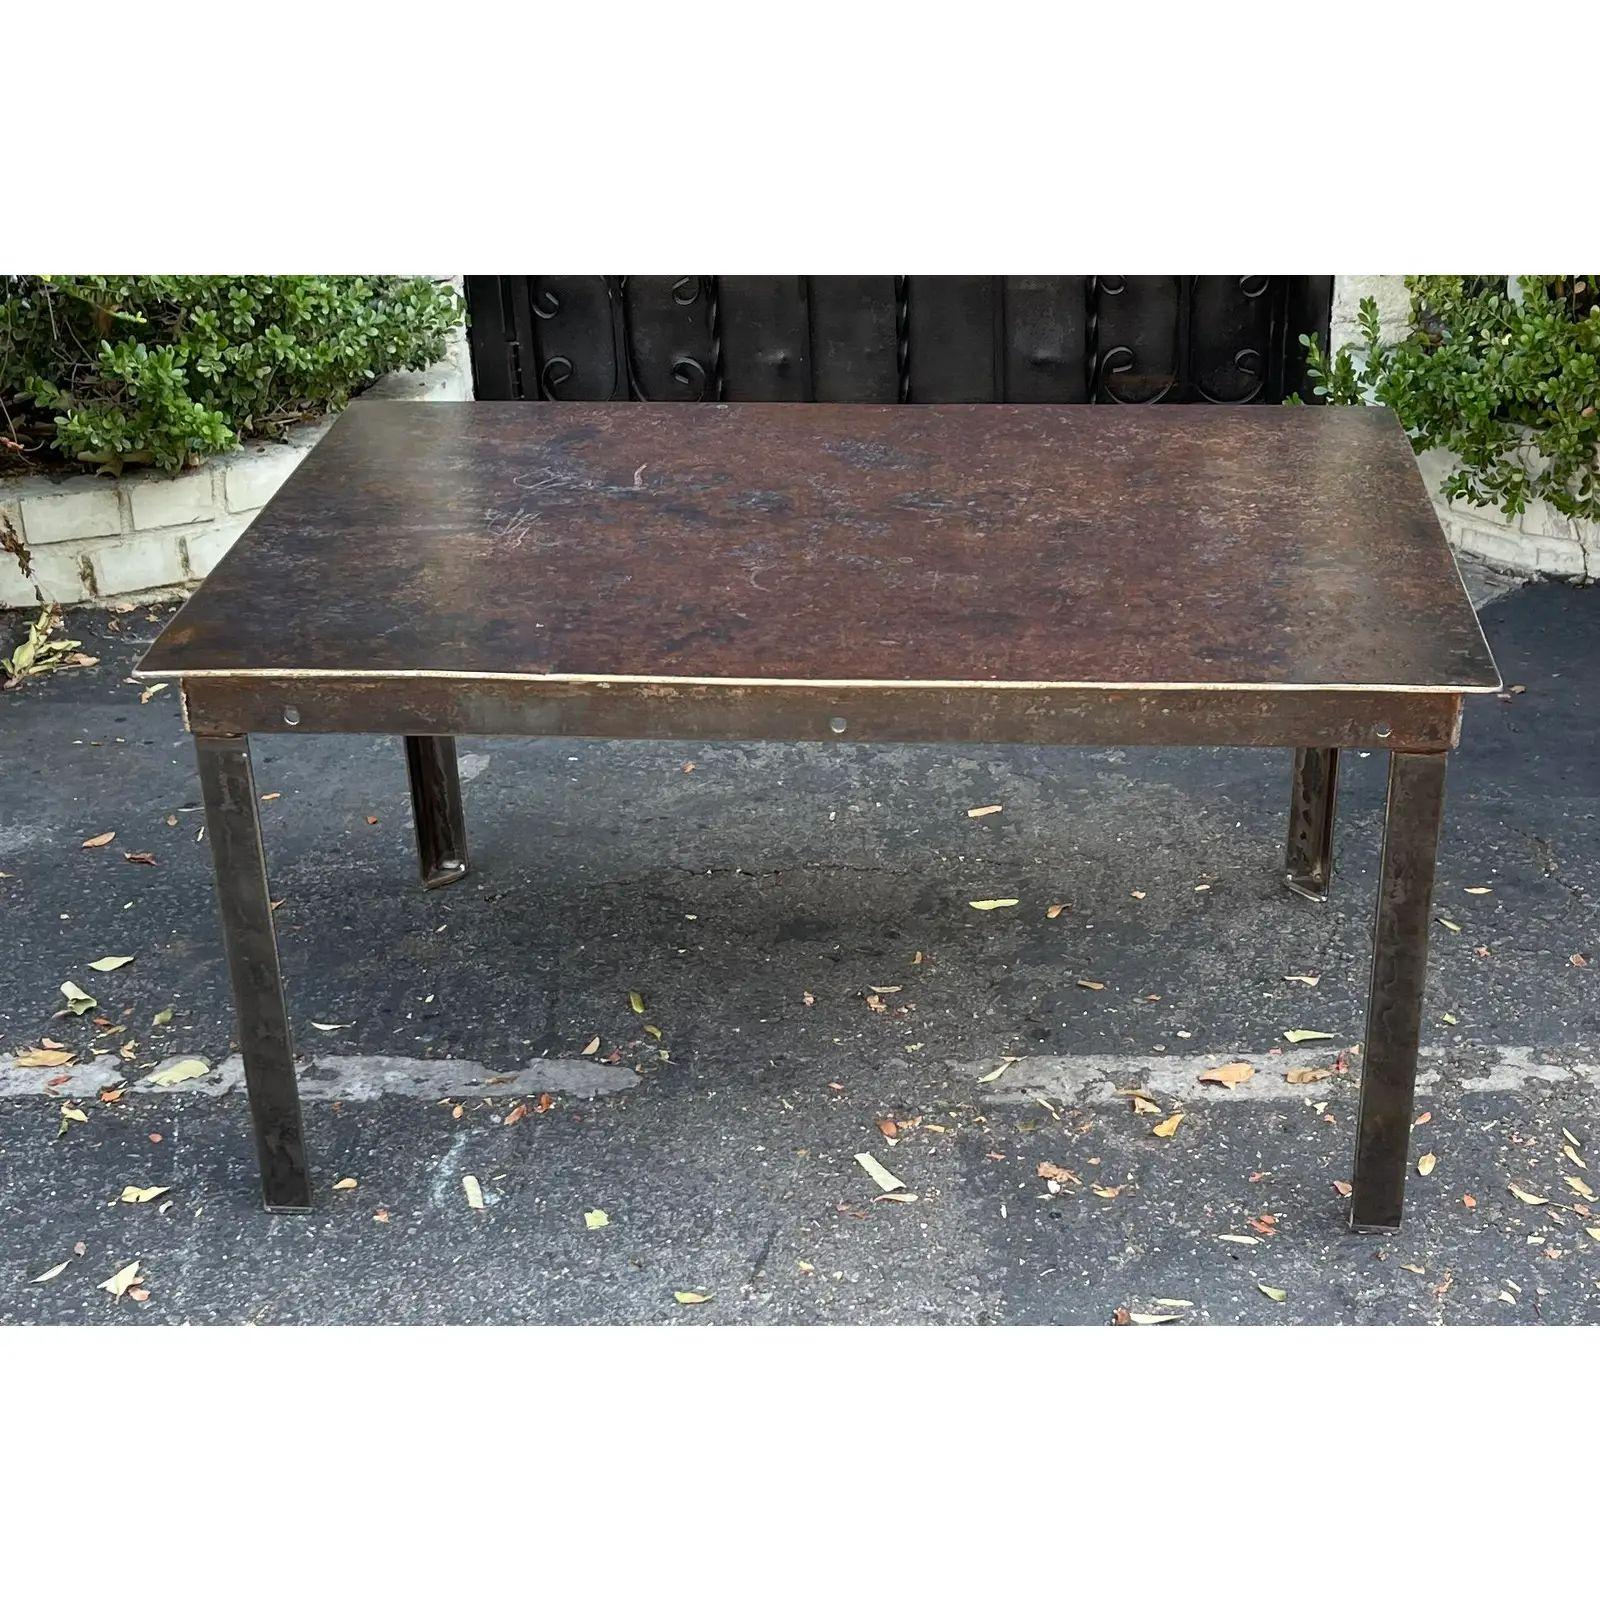 Modern Pounded Iron Industrial Chic Coffee Cocktail Table In Good Condition For Sale In LOS ANGELES, CA